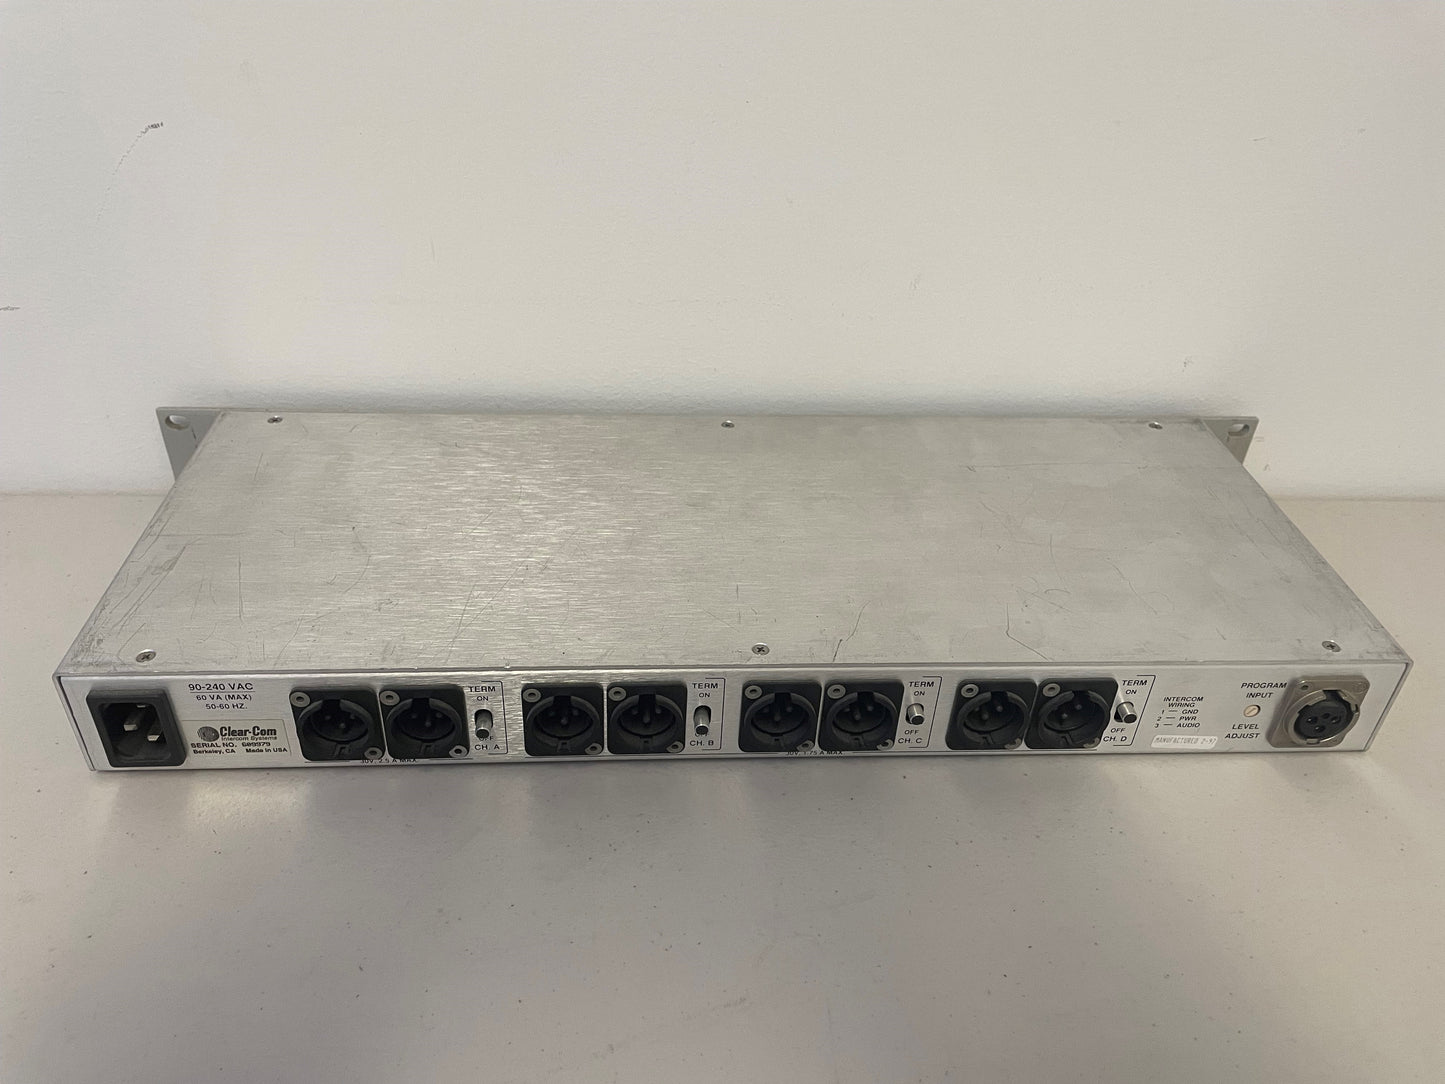 Used Clear-Com PL Pro PS-464, 4Ch Power Supply for Sale. We Sell Professional Audio Equipment. Audio Systems, Amplifiers, Consoles, Mixers, Electronics, Entertainment and Live Sound. 